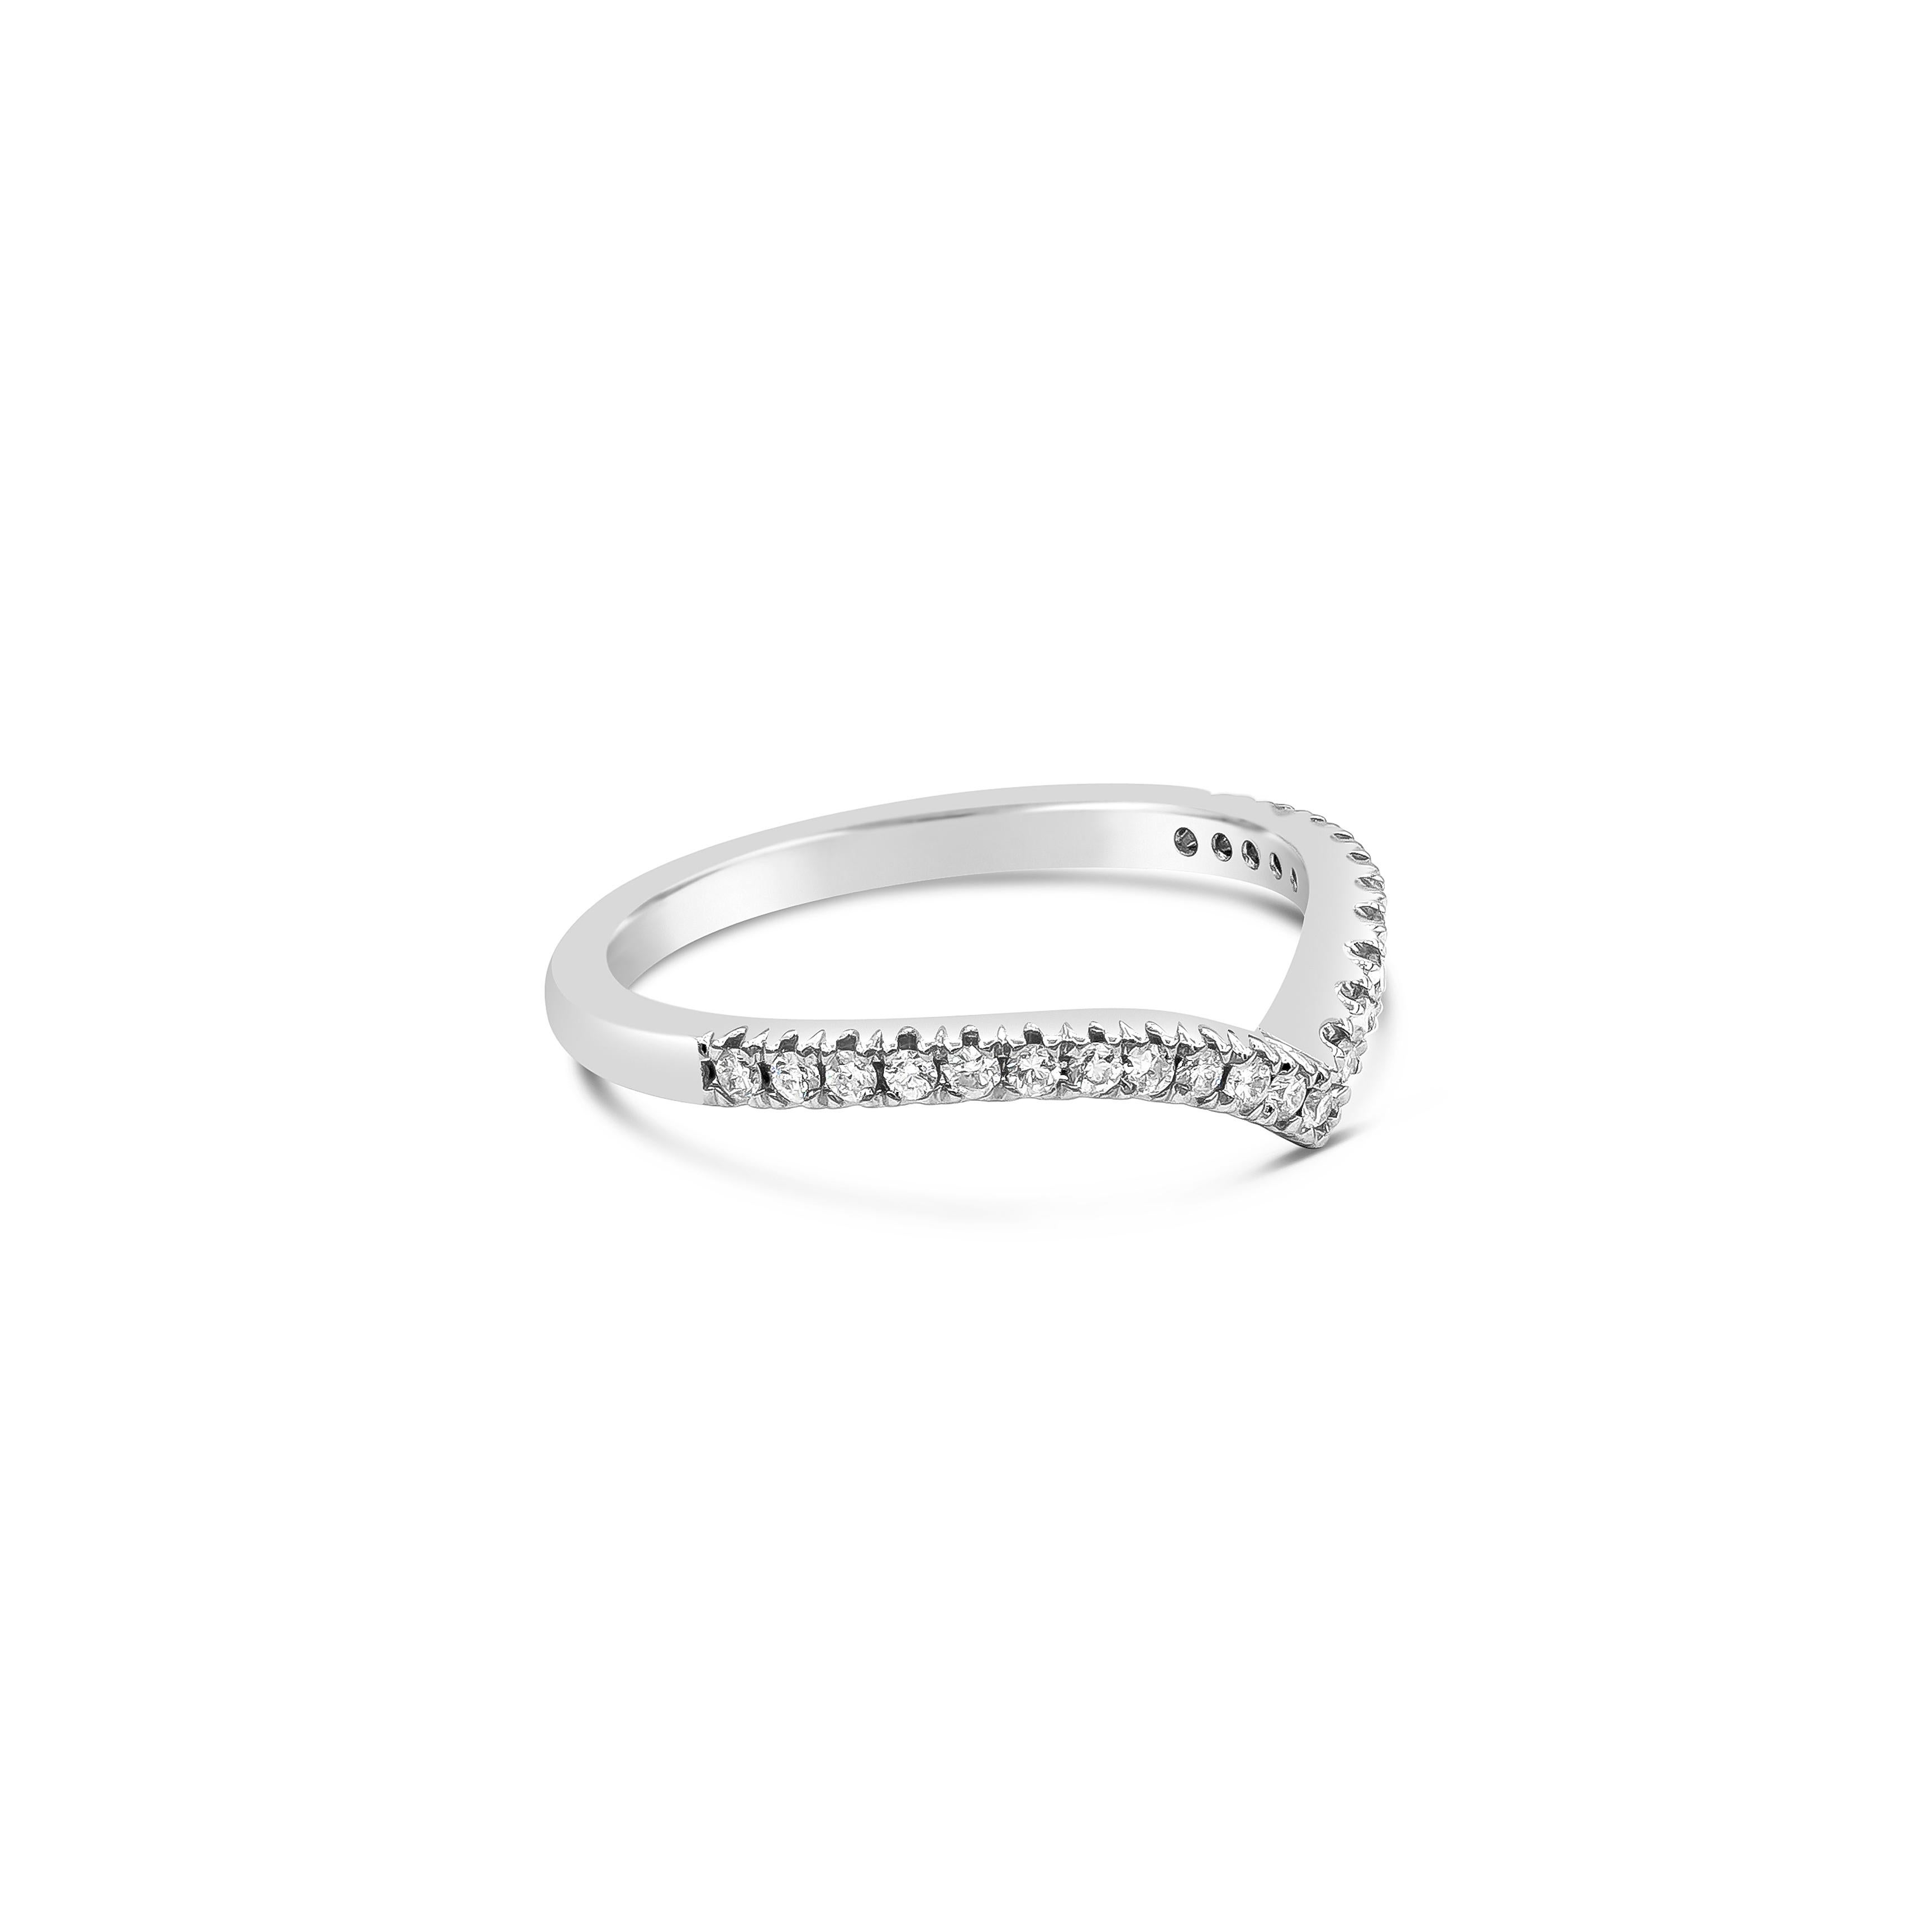 A modern wedding band style that can stack with an engagement ring. Set with round brilliant diamonds weighing 0.22 carats total, along a V-shaped mounting. A perfect compliment for any shape engagement ring. Made with 18K White Gold, Size 6.5 US